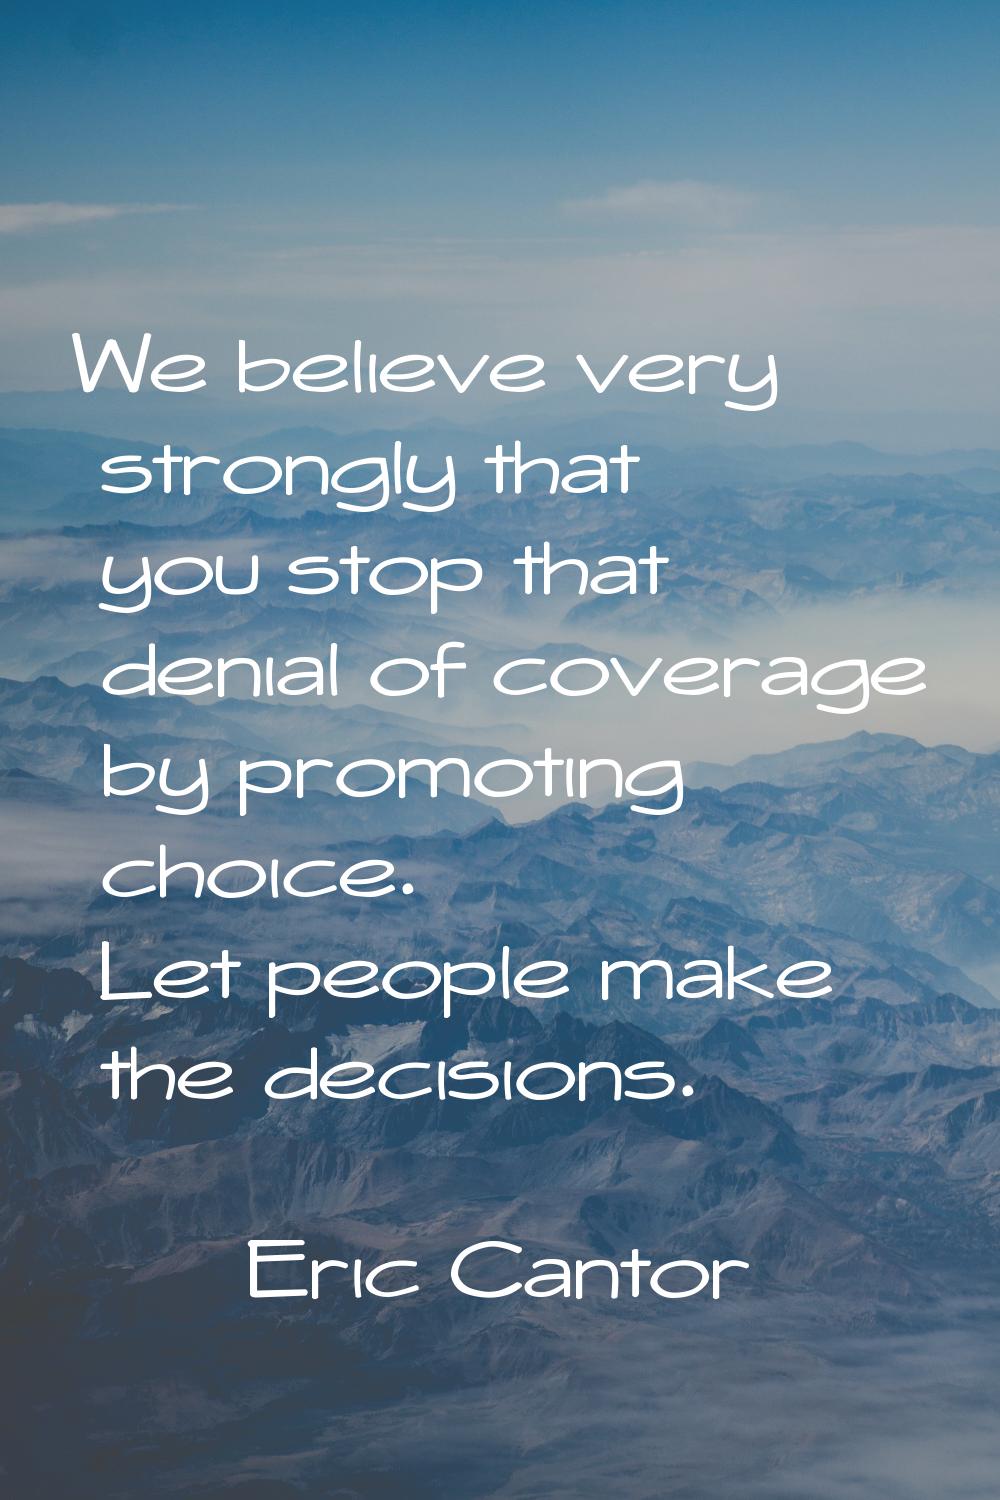 We believe very strongly that you stop that denial of coverage by promoting choice. Let people make